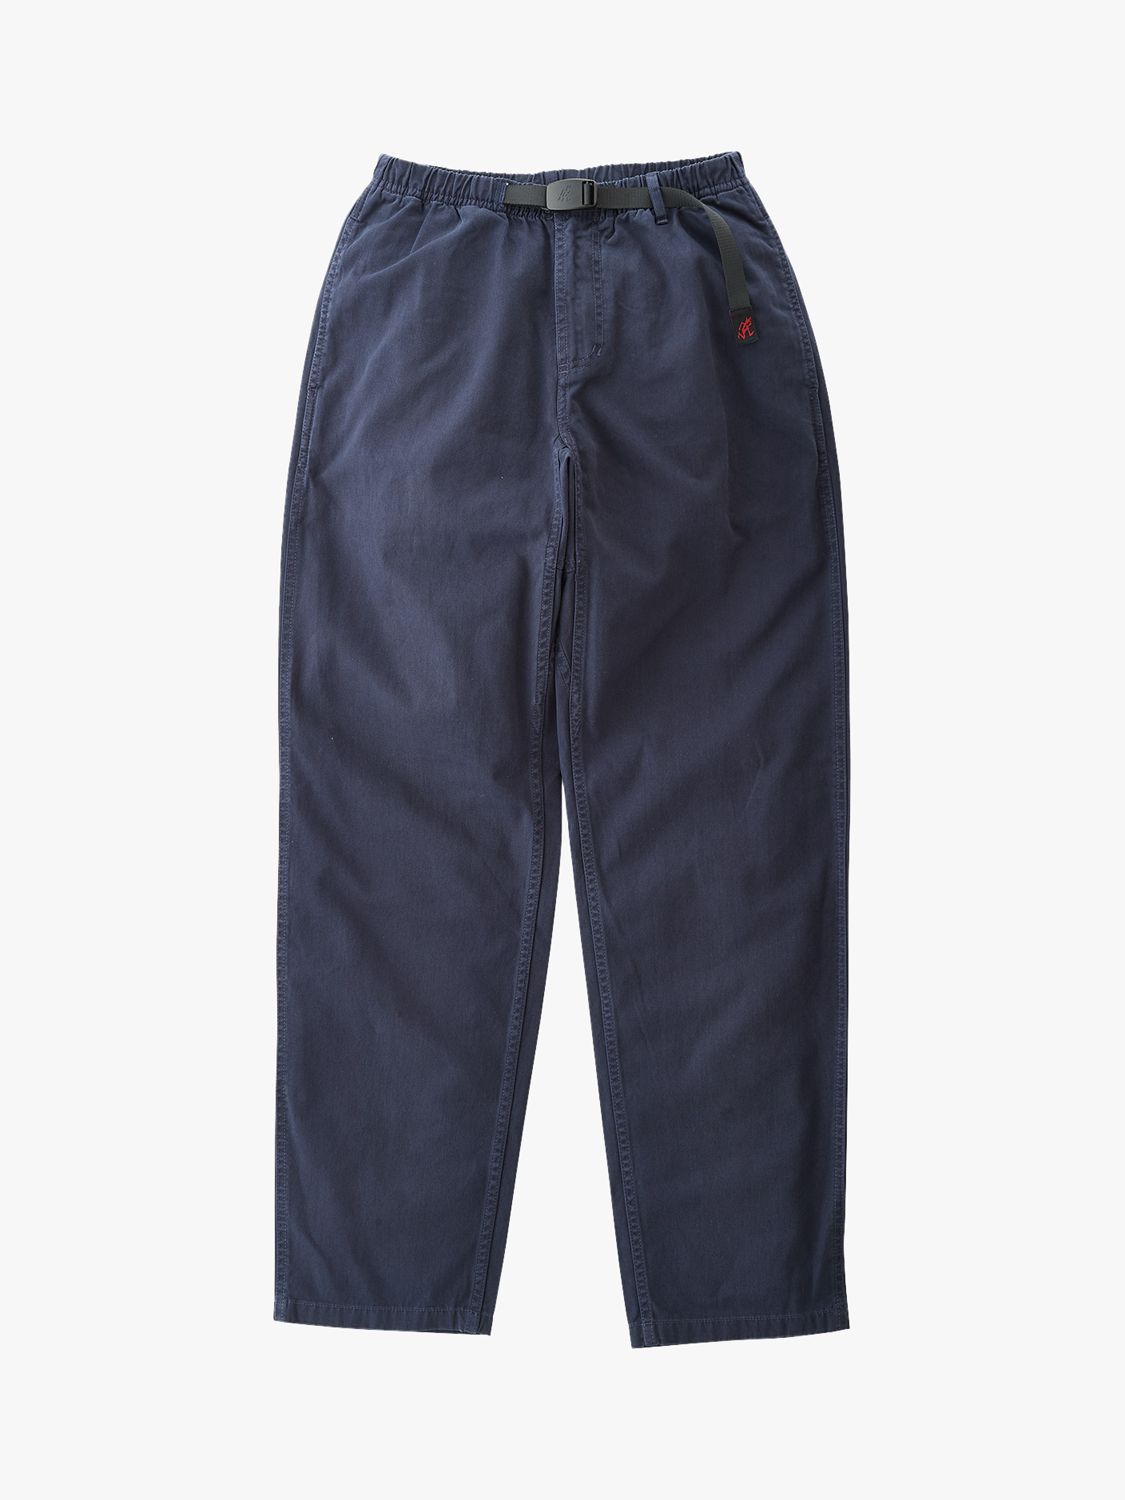 Buy Gramicci Organic Cotton Twill Trousers, Navy Online at johnlewis.com